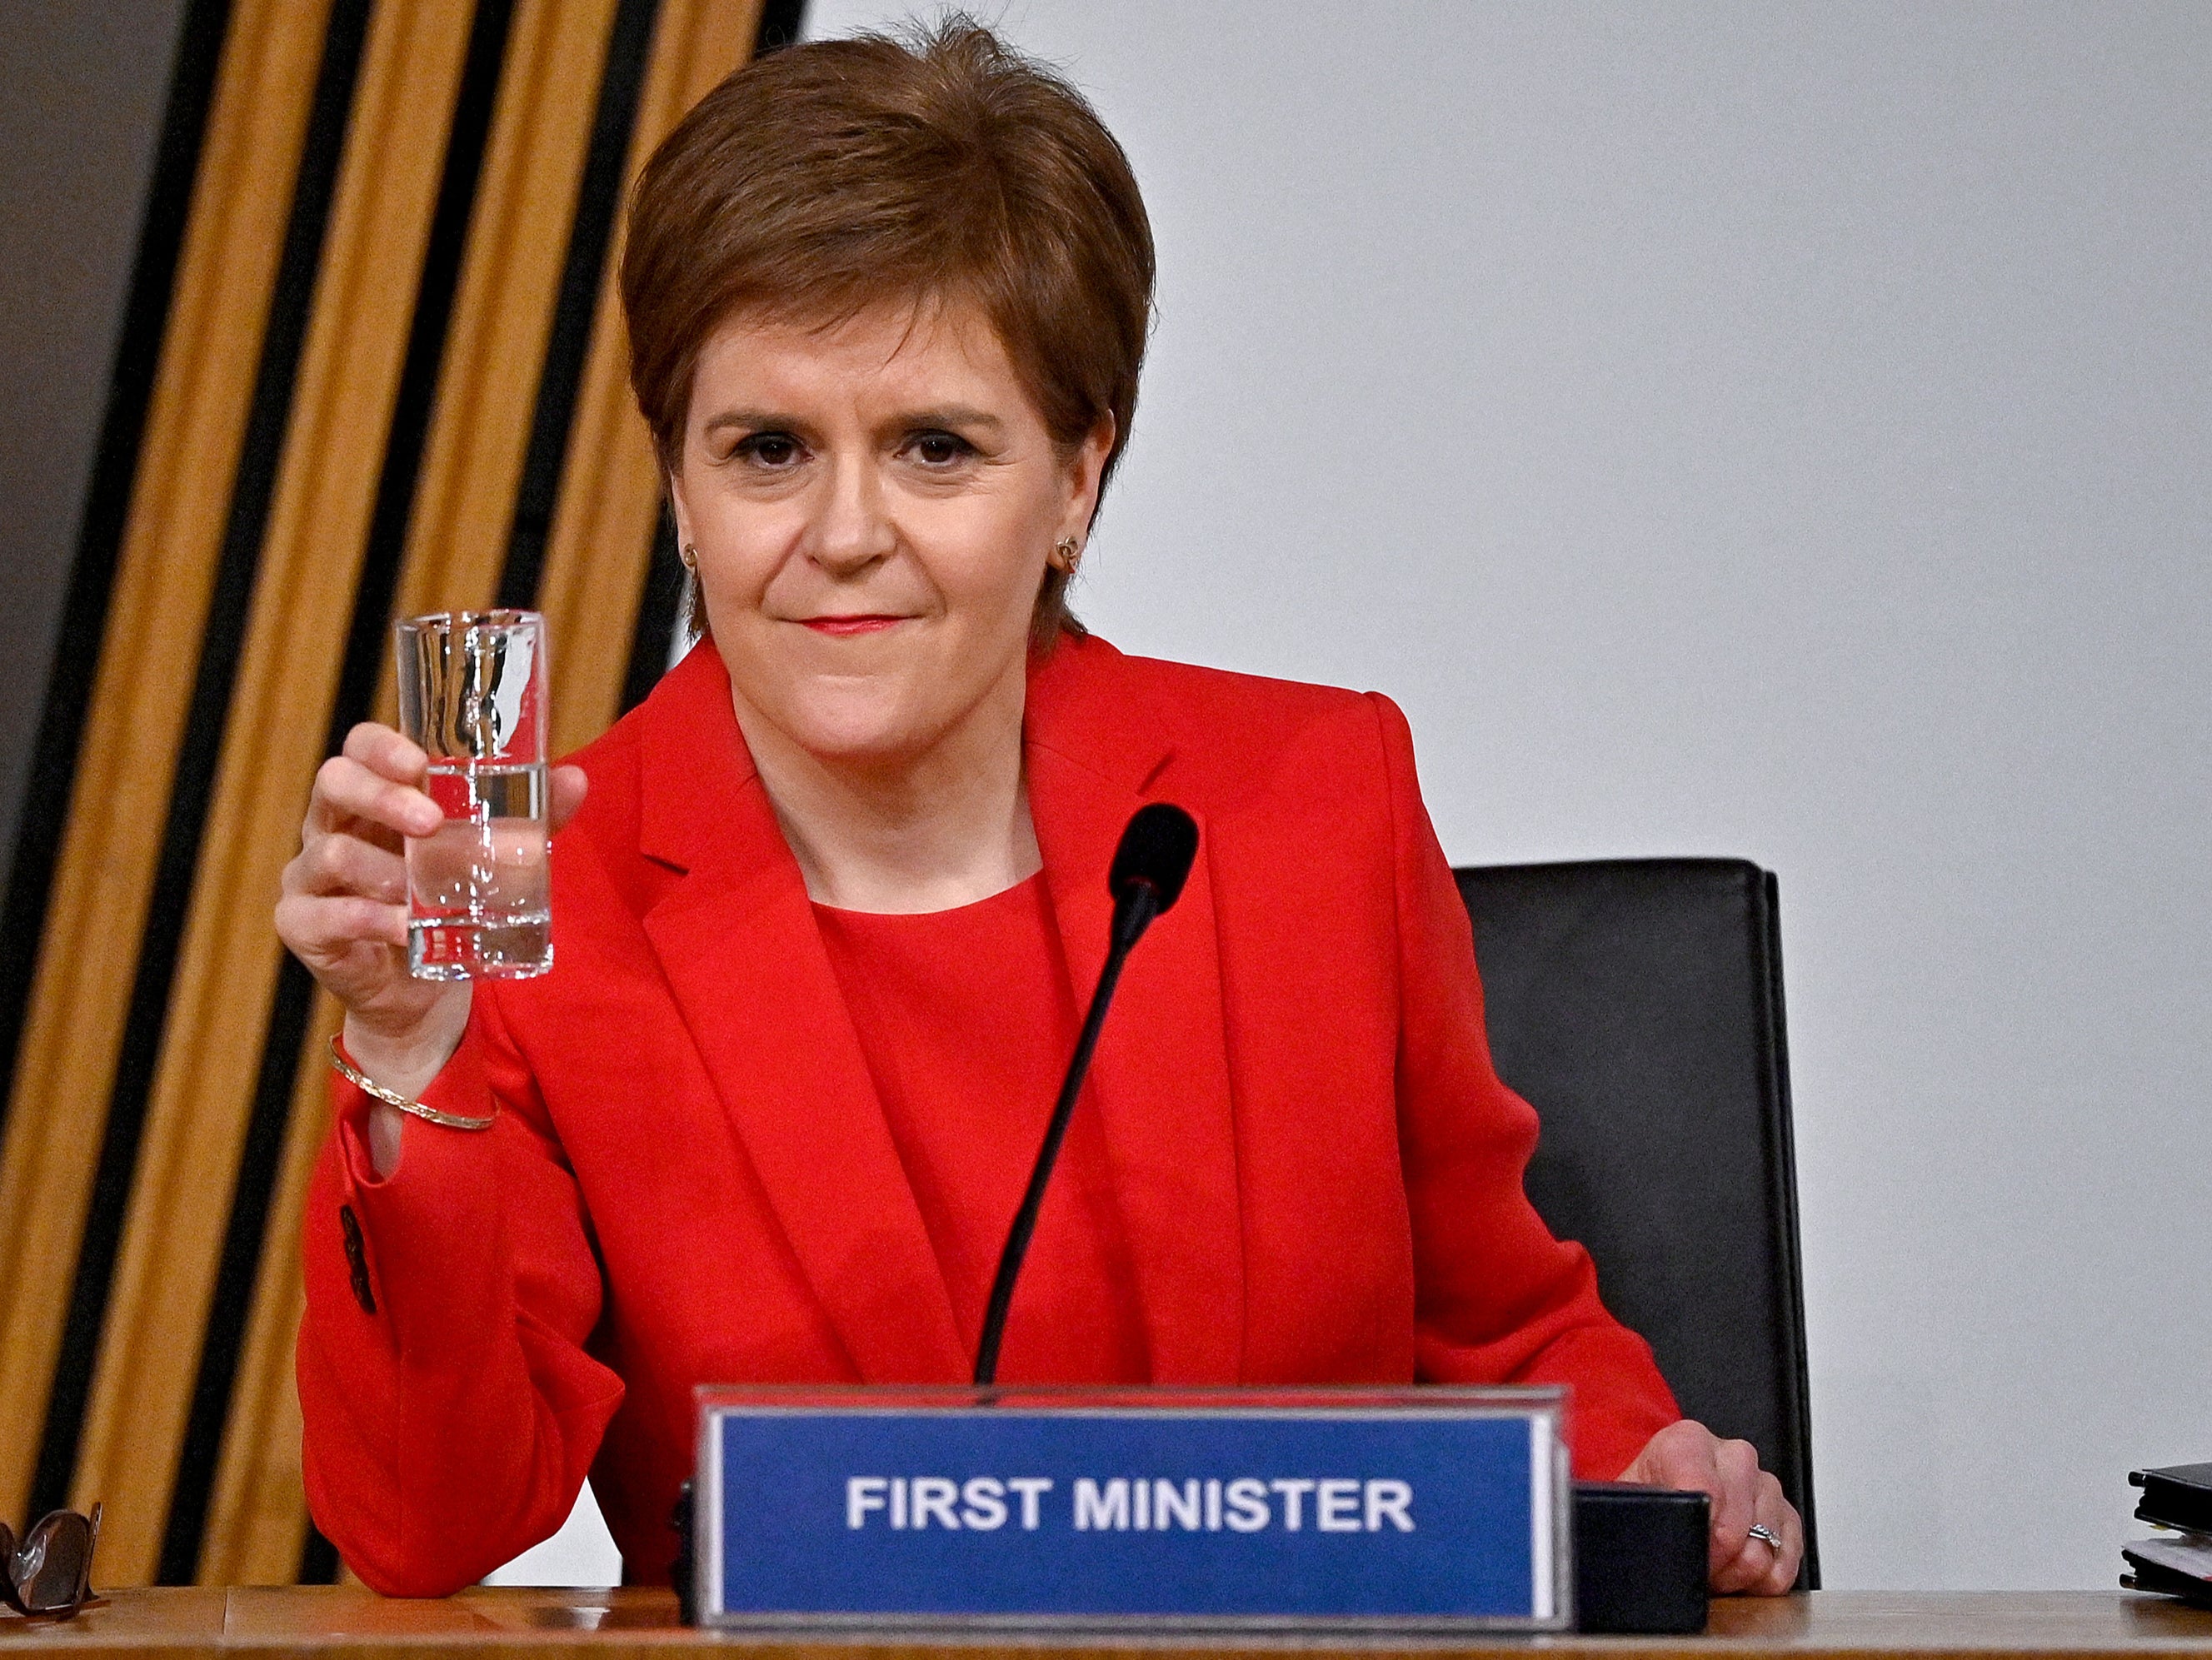 Sturgeon gives evidence in Holyrood this week